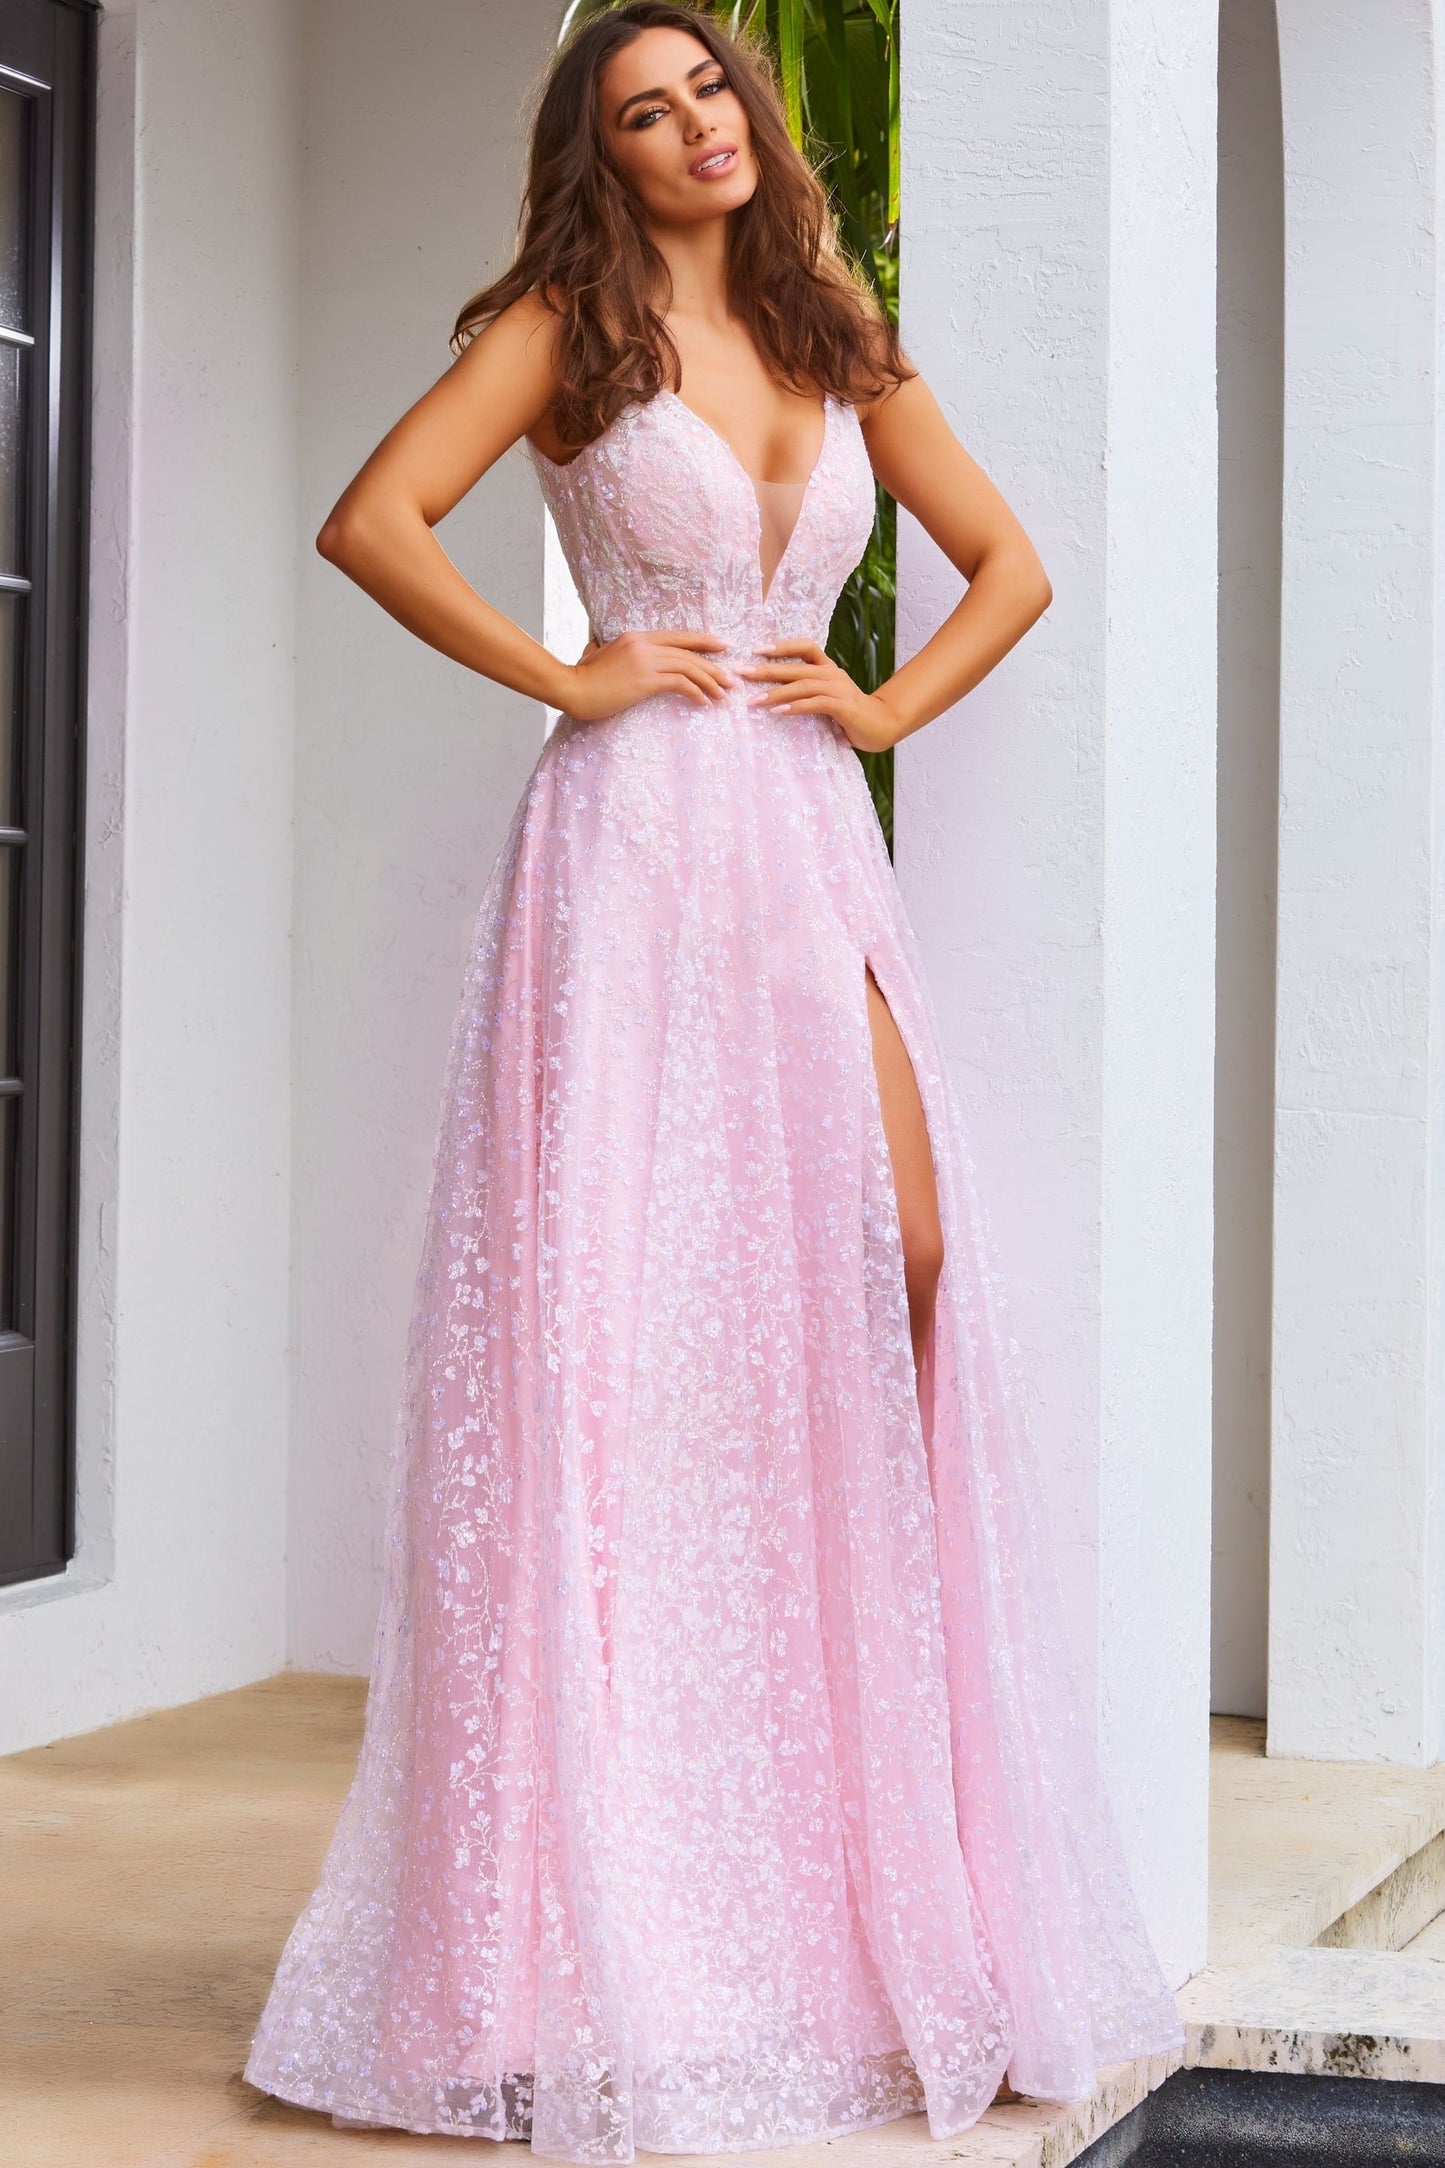 Pink Tulle Floral Lace A-line Sweetheart Prom Dress SP750